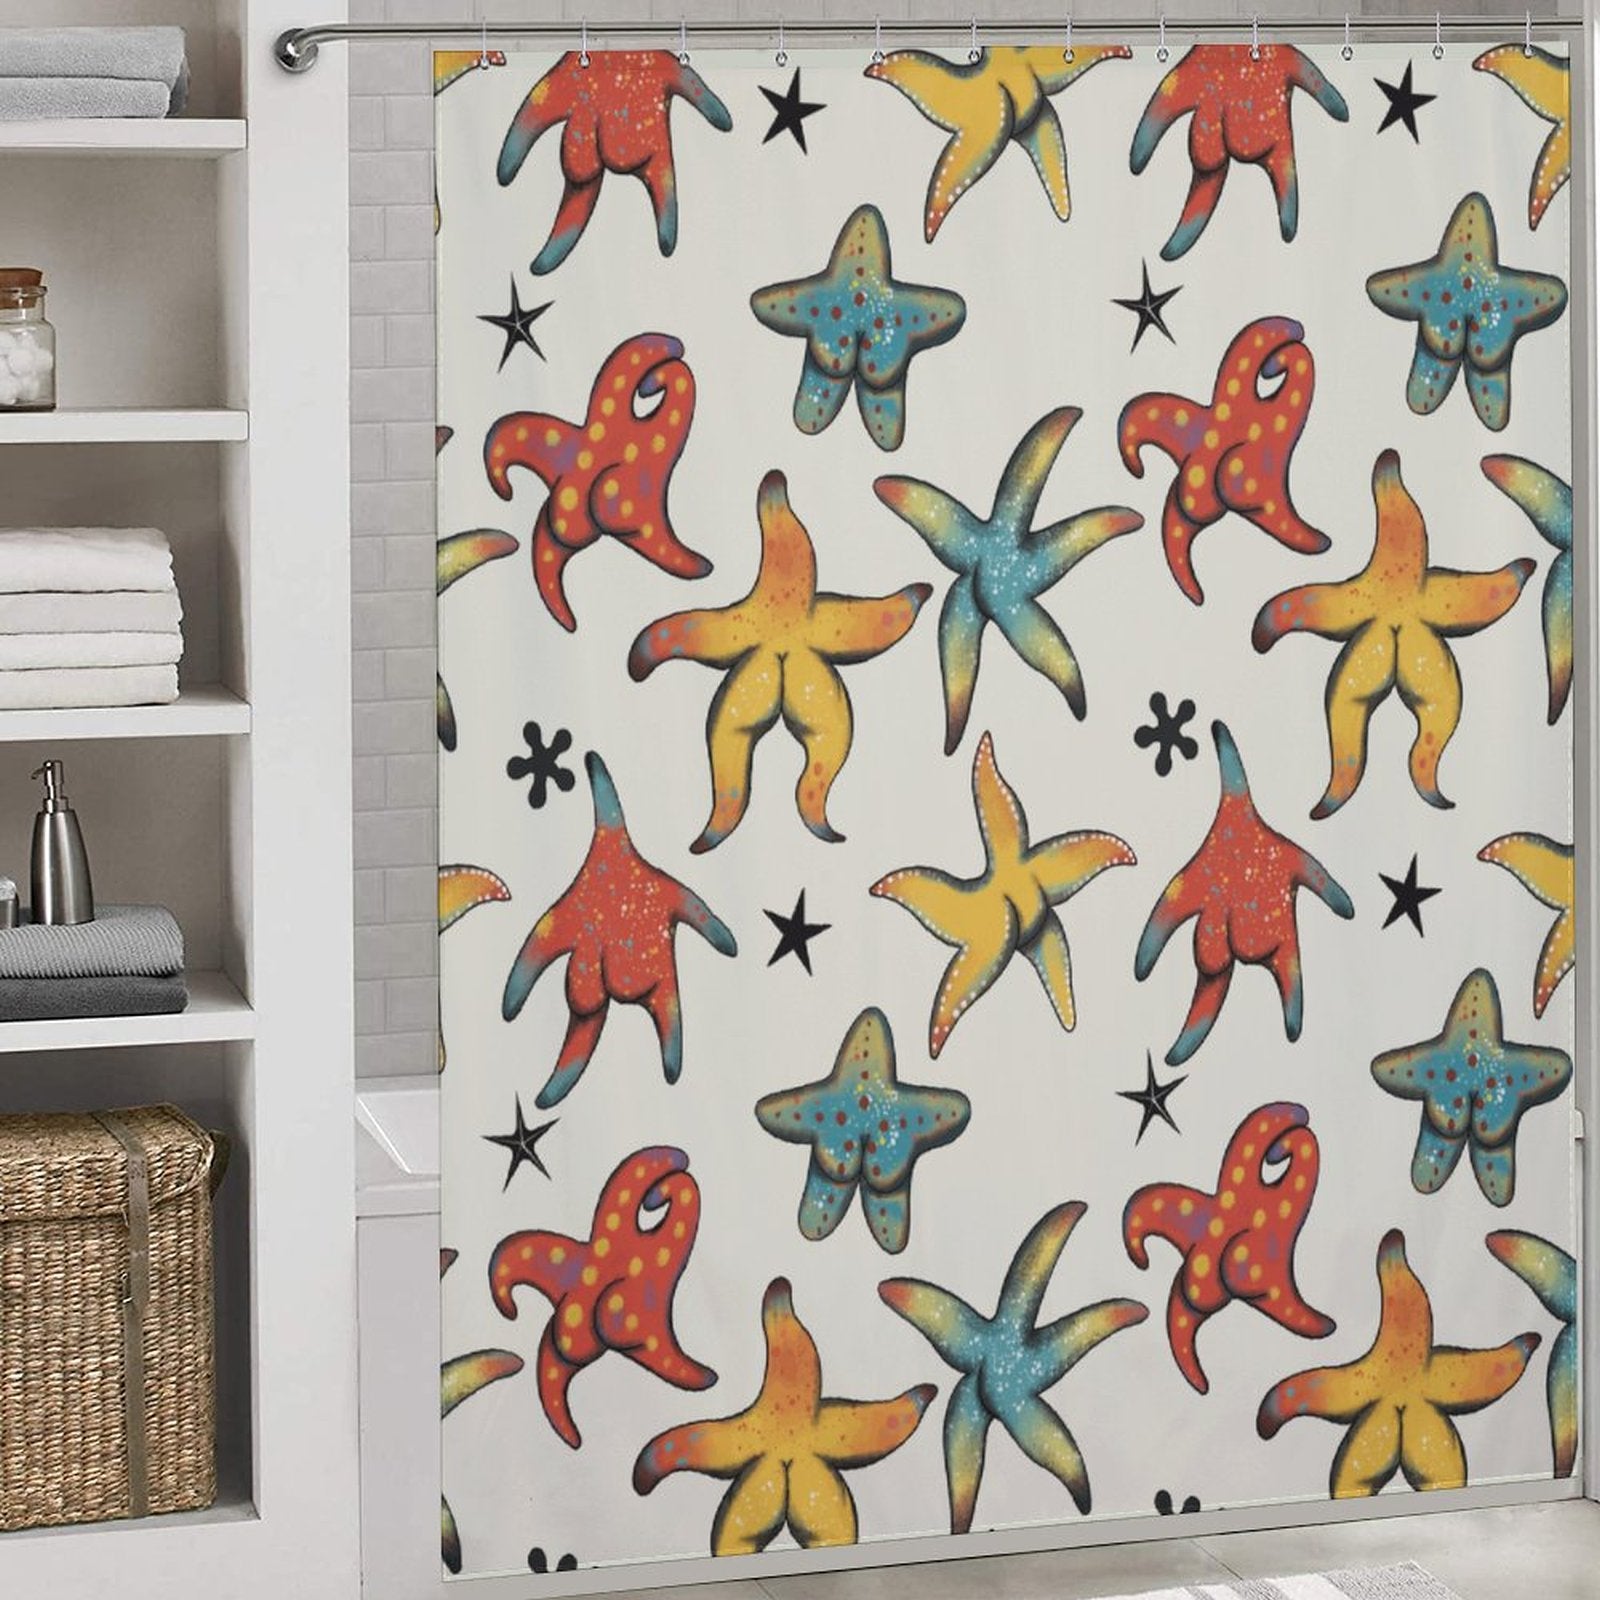 Enhance your bathroom decor with a vibrant Unique Funny Starfish Butt Shower Curtain from Cotton Cat, emanating coastal vibes.